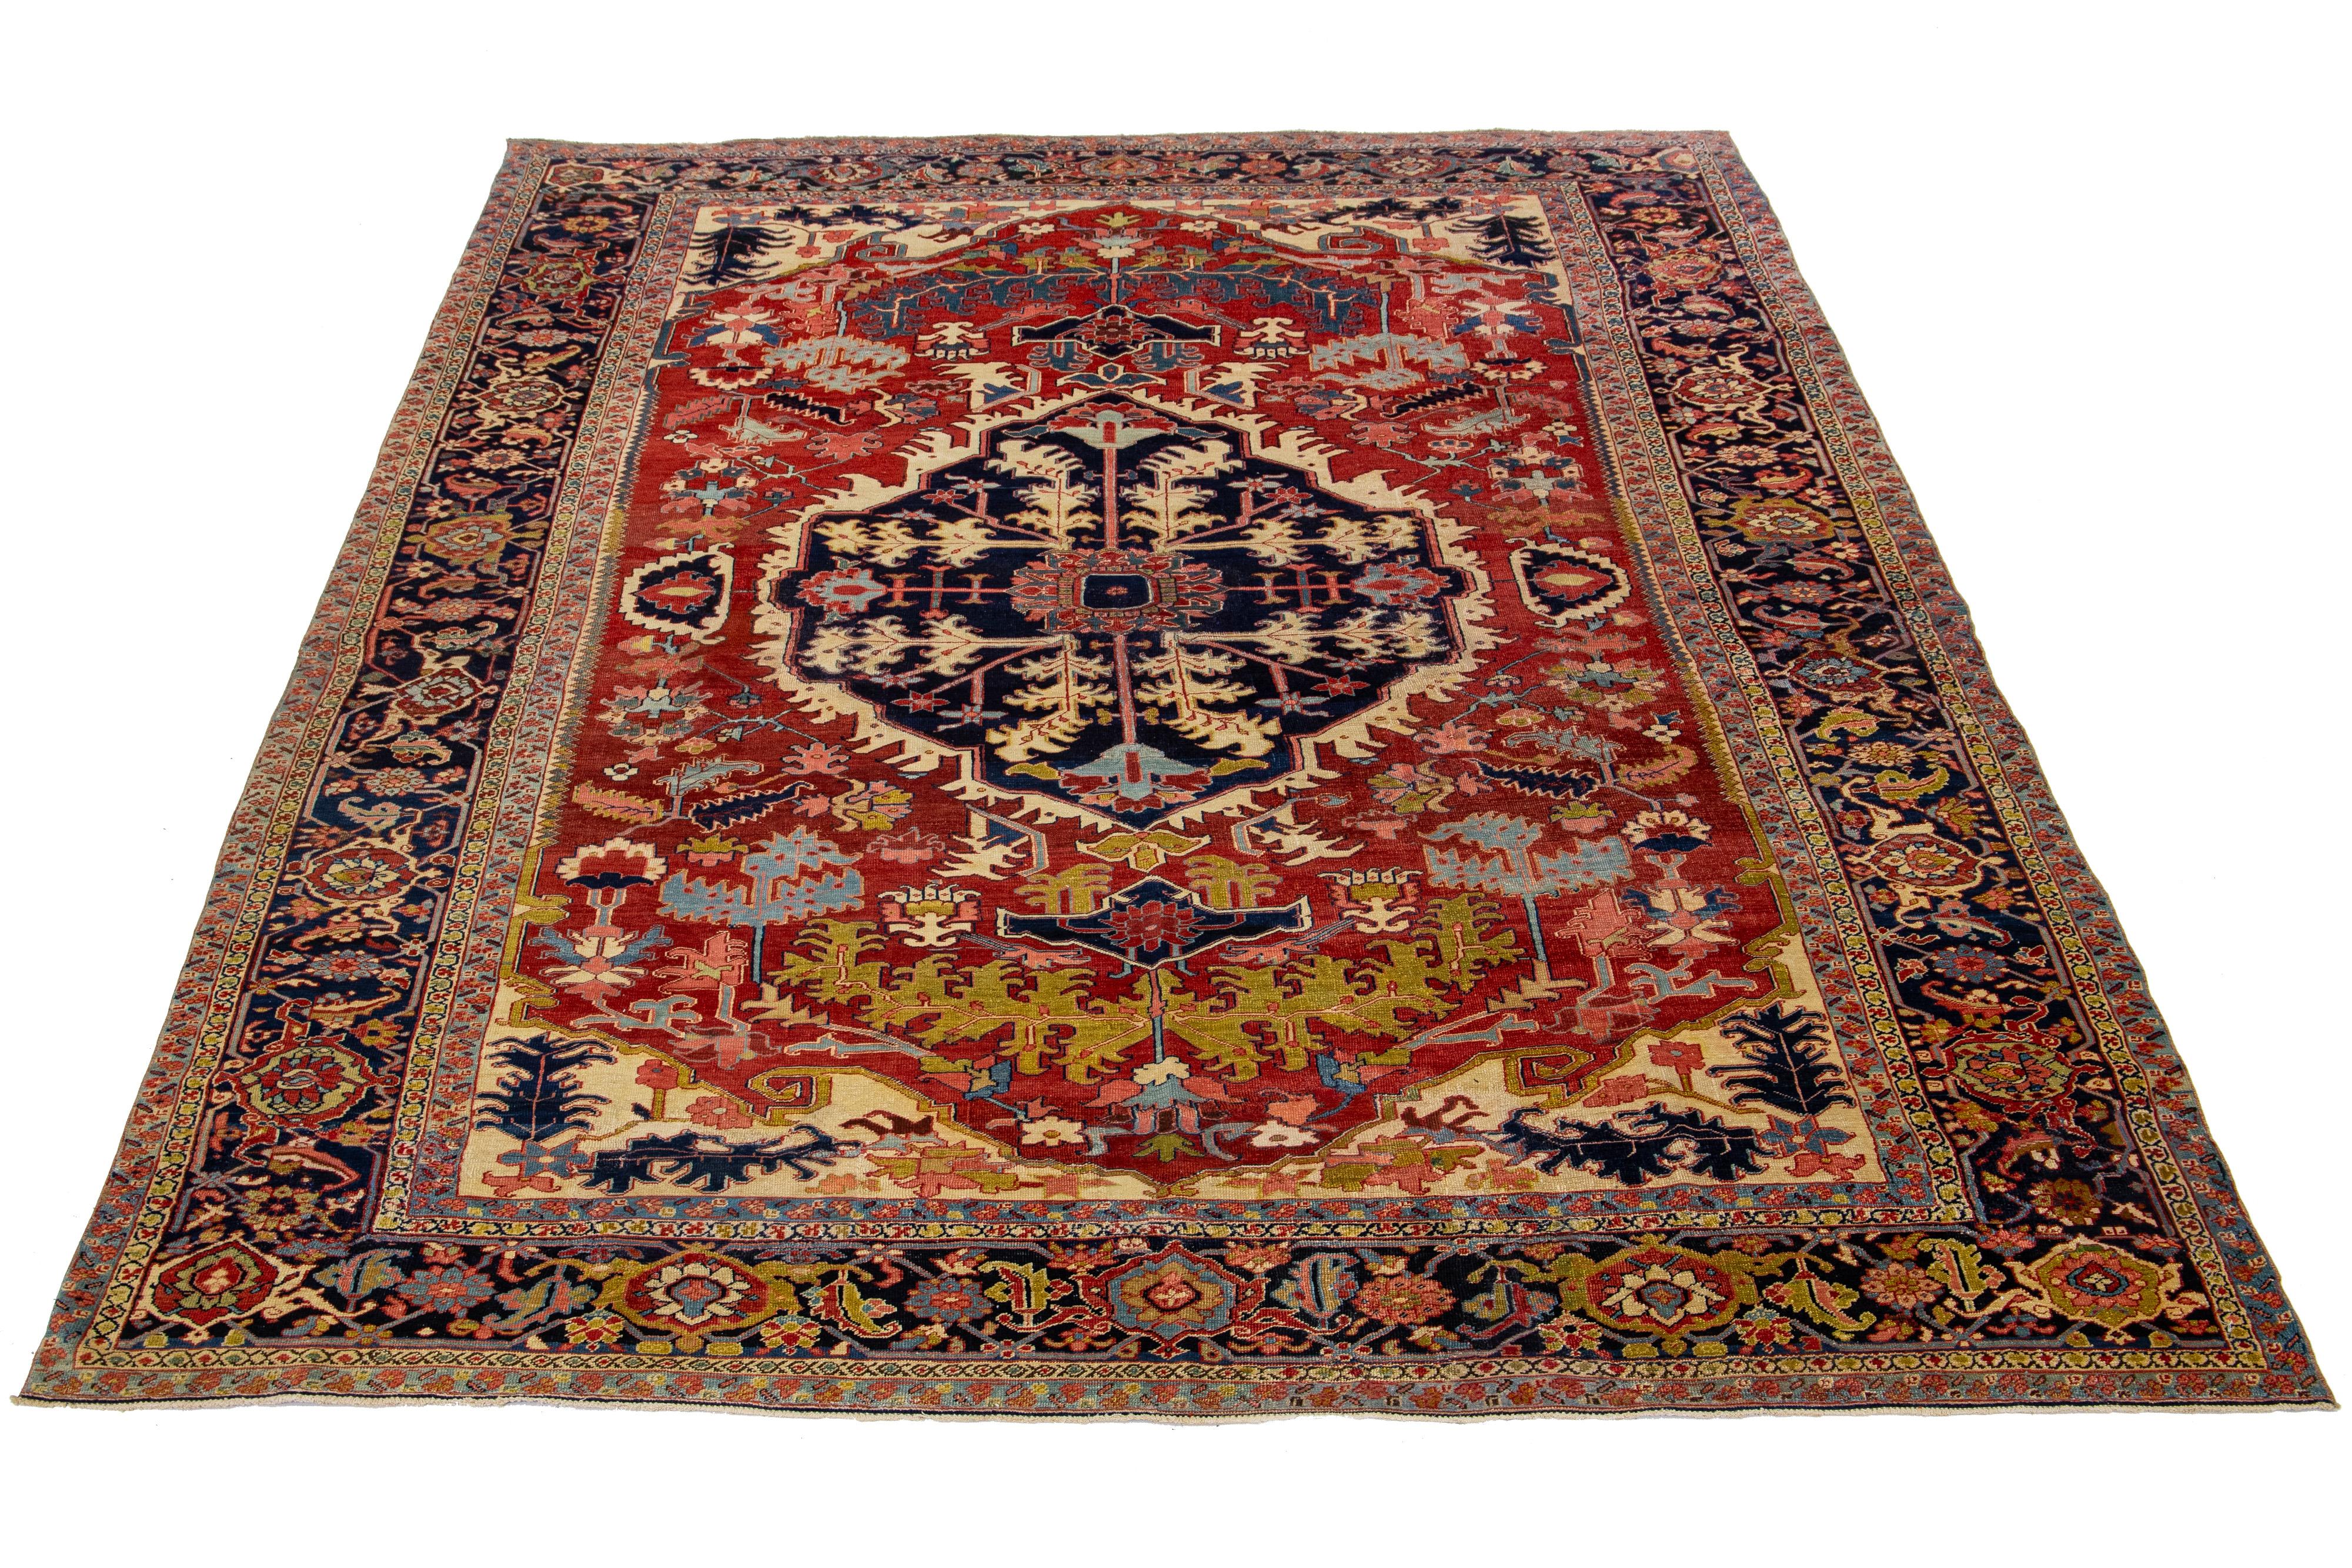 This antique Persian Heriz rug is made of hand-knotted wool. The red field showcases a captivating medallion pattern adorned with multiple shades of colors.

This rug measures 9'3